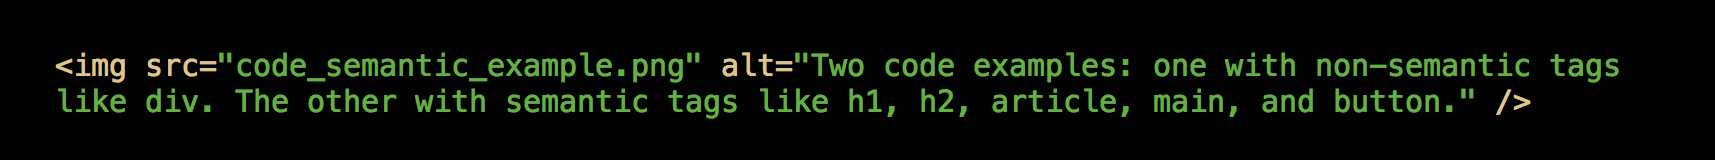 an example of code using descriptive alt text for an image: "Two code examples: one with non-semantic tags like div. The other with semantic tags like h1, h2, article, main, and button."